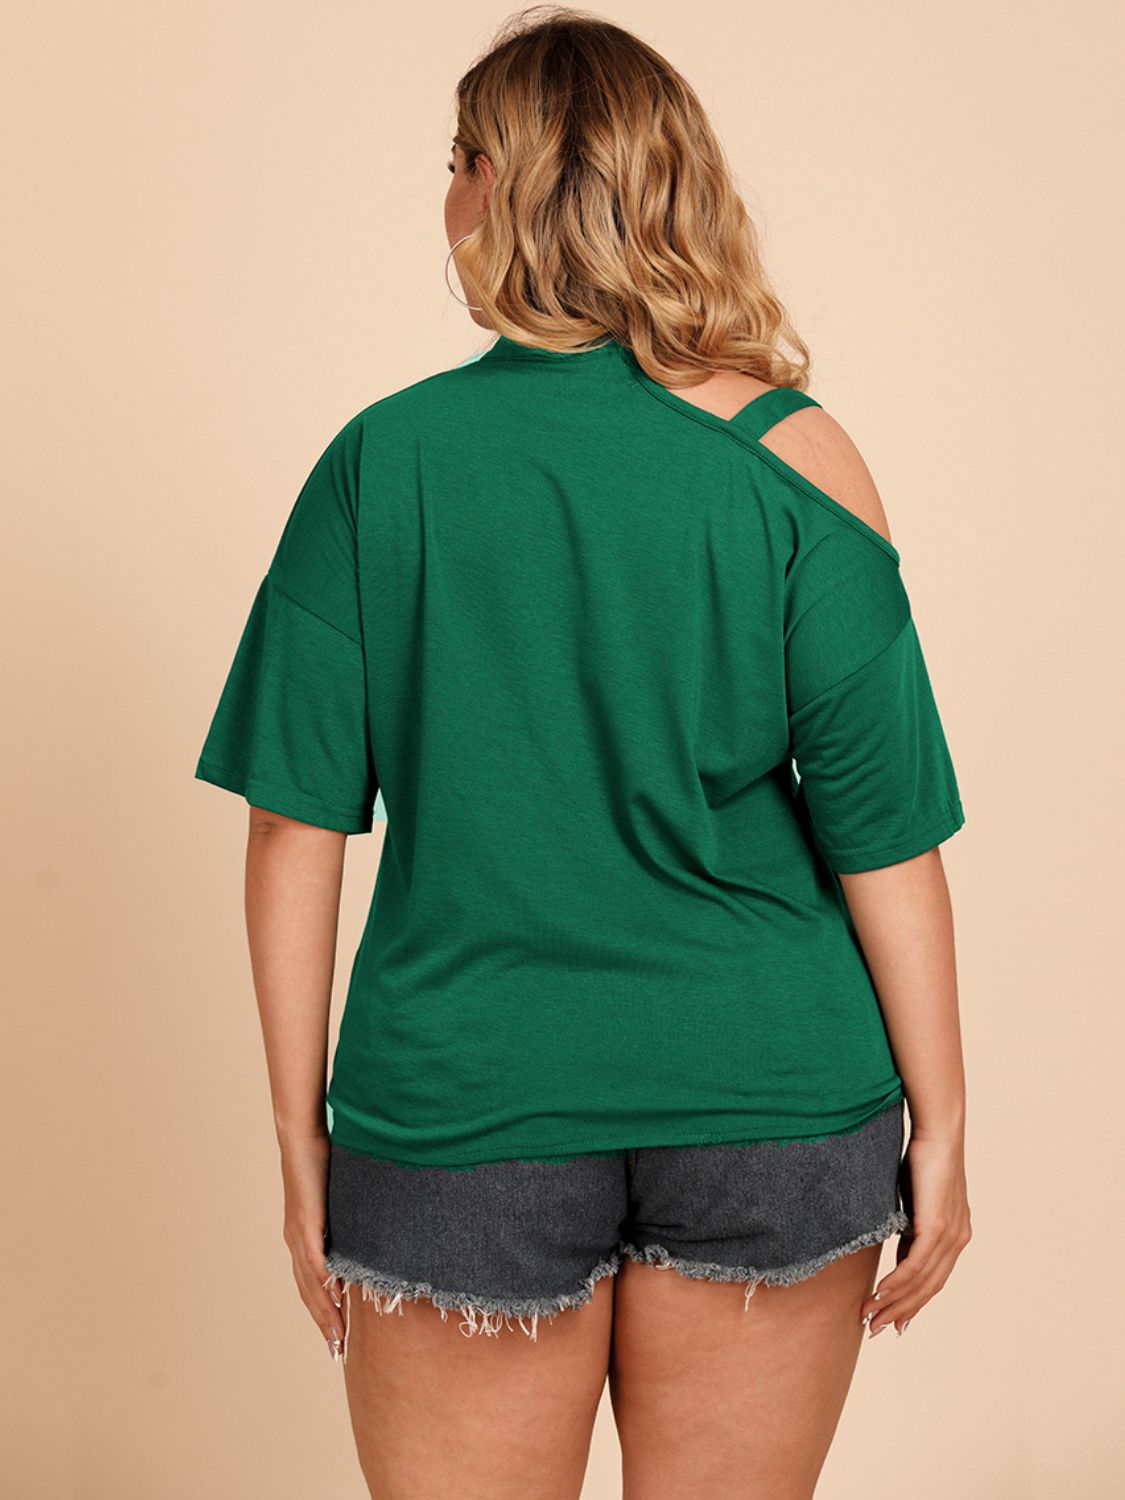 Plus Size Tied Cold-Shoulder Tee Shirt apparel & accessories